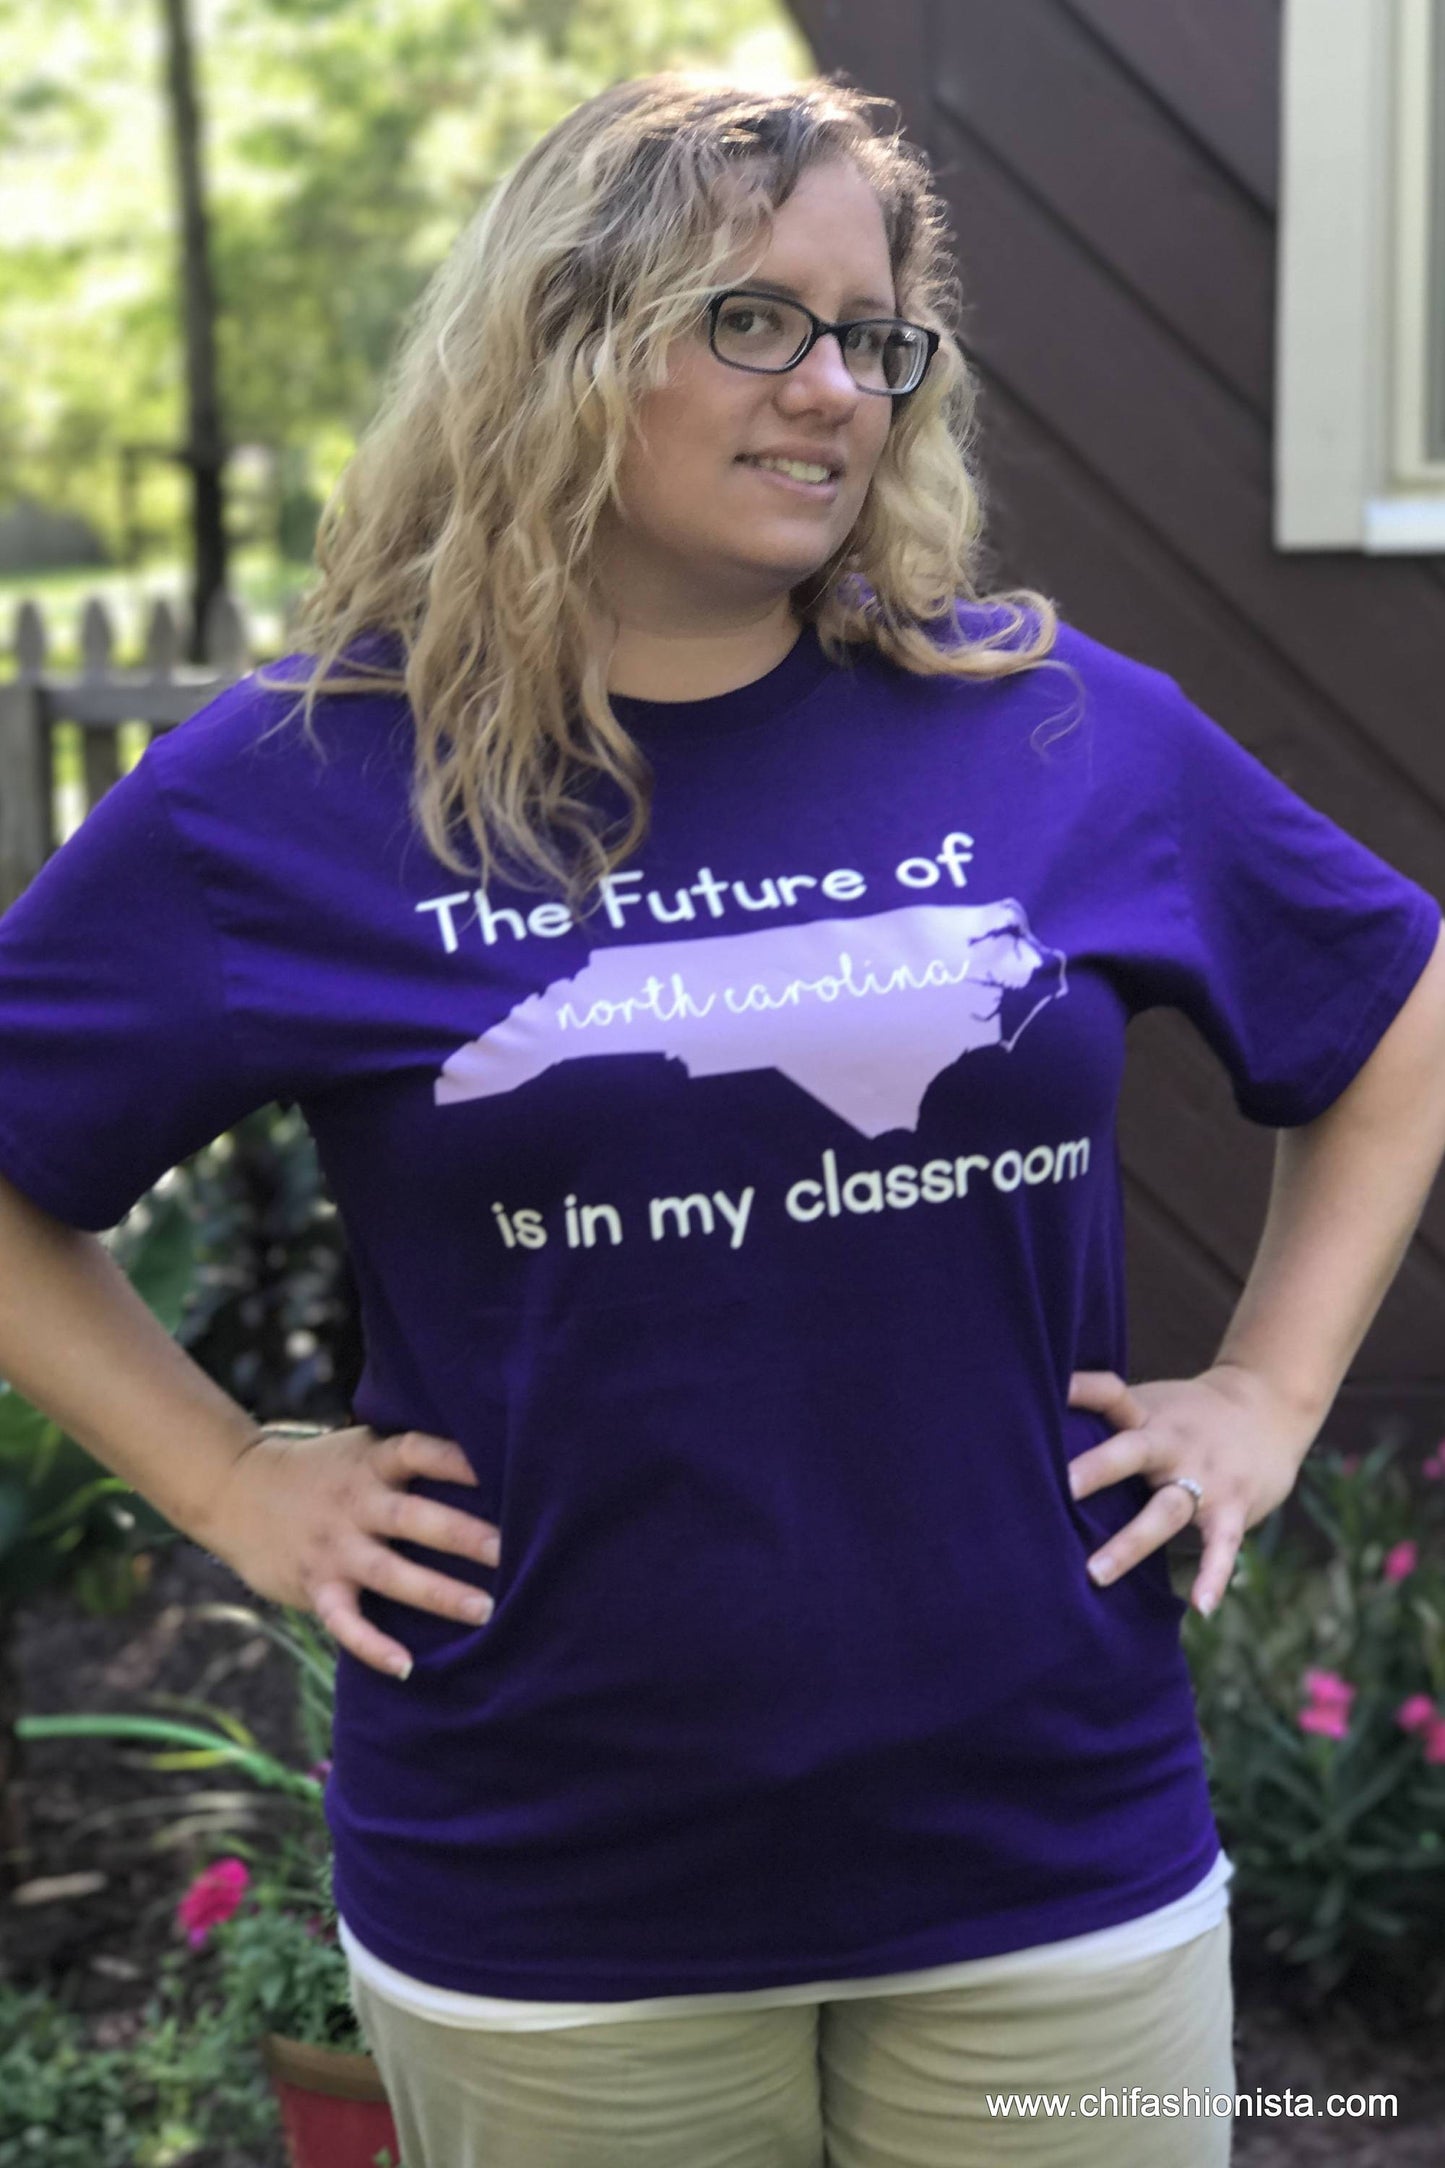 Handcrafted Children's Clothing, Clothing for Children and Parents, North Carolina Teacher- Future of North Carolina is in my Classroom Shirt - Teacher Gifts, chi-fashionista